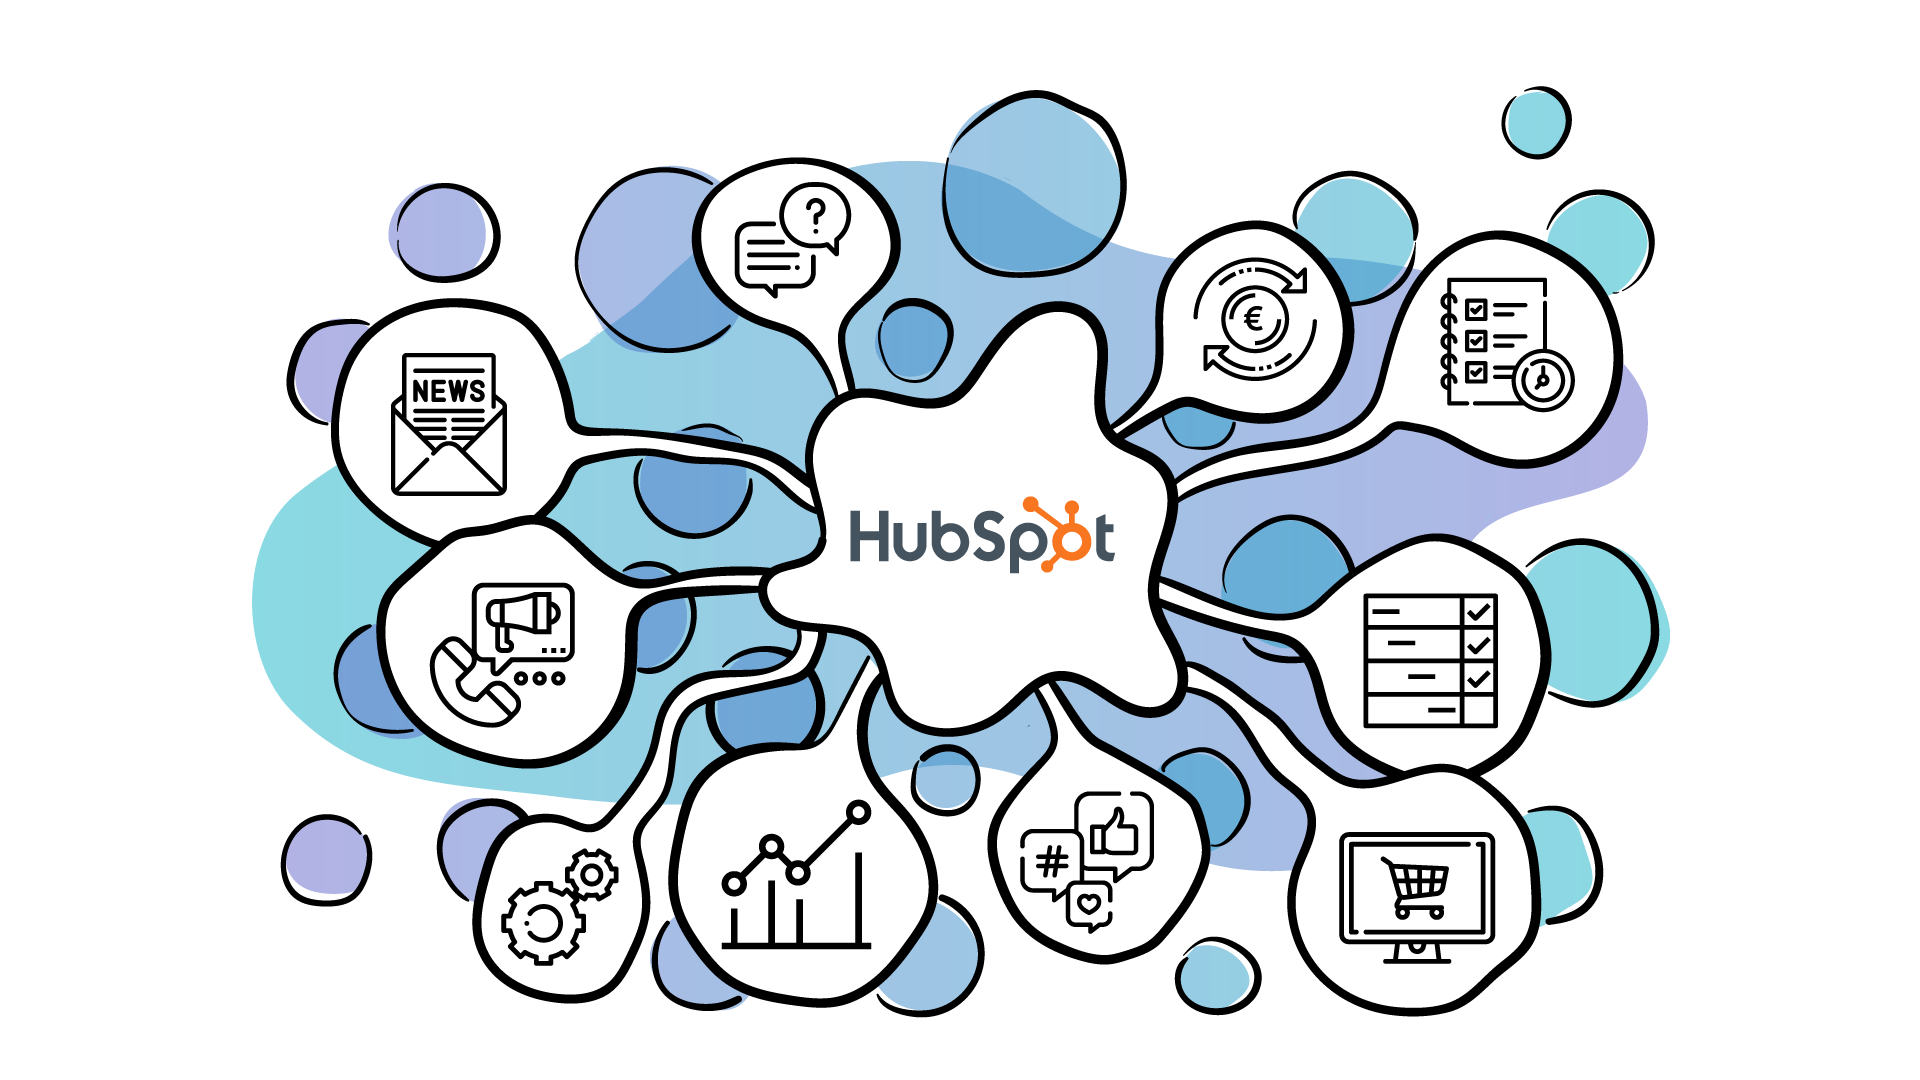 HubSpot integrates with many tools